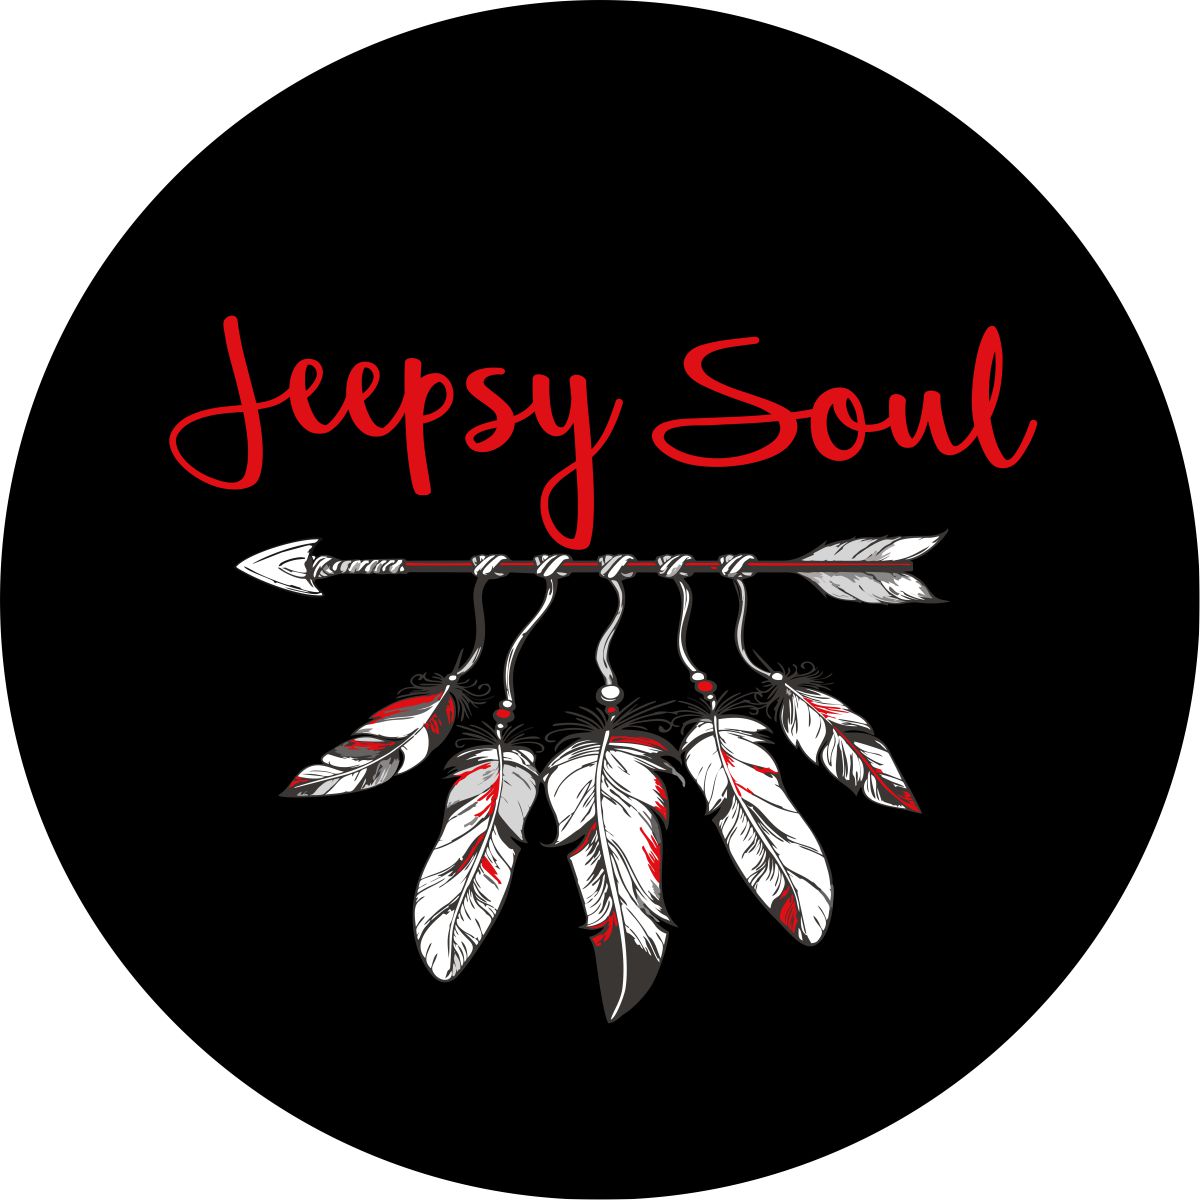 Jeepsy Soul with an Arrow and feather spare tire cover for Jeep design in red